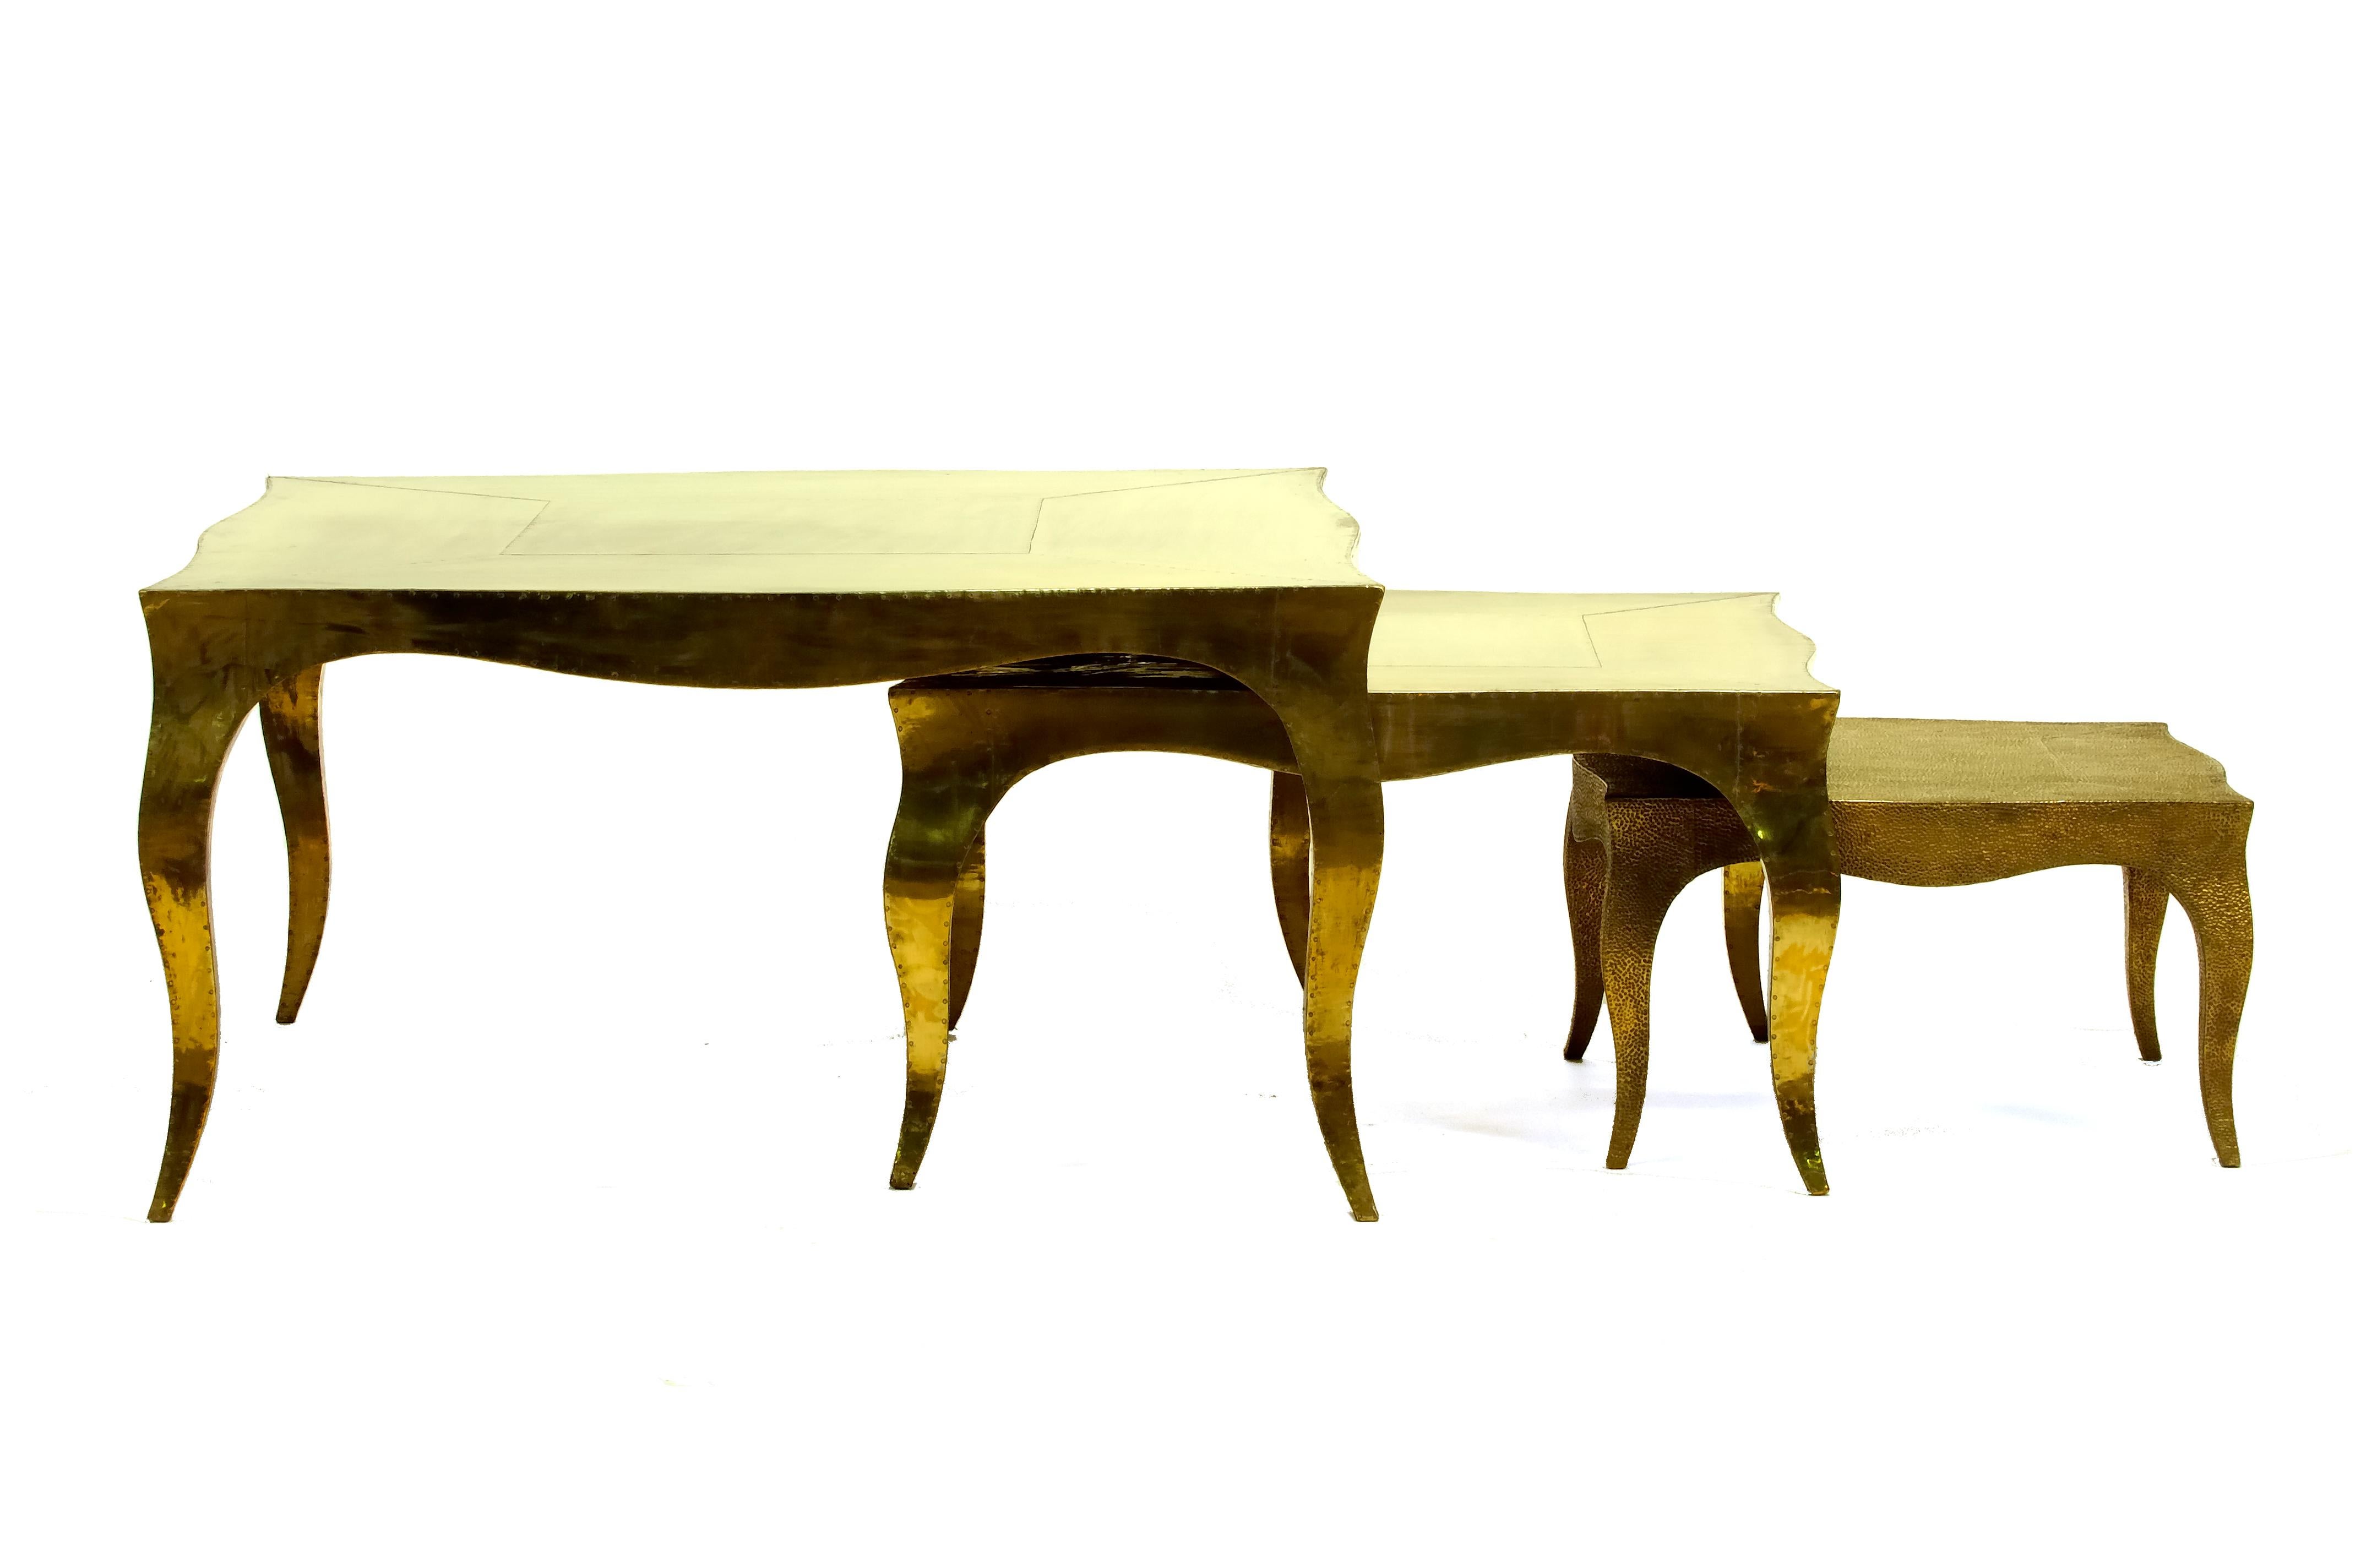 Louise Art Deco Industrial and Work Tables Mid. Hammered White Bronze by Paul Ma For Sale 7